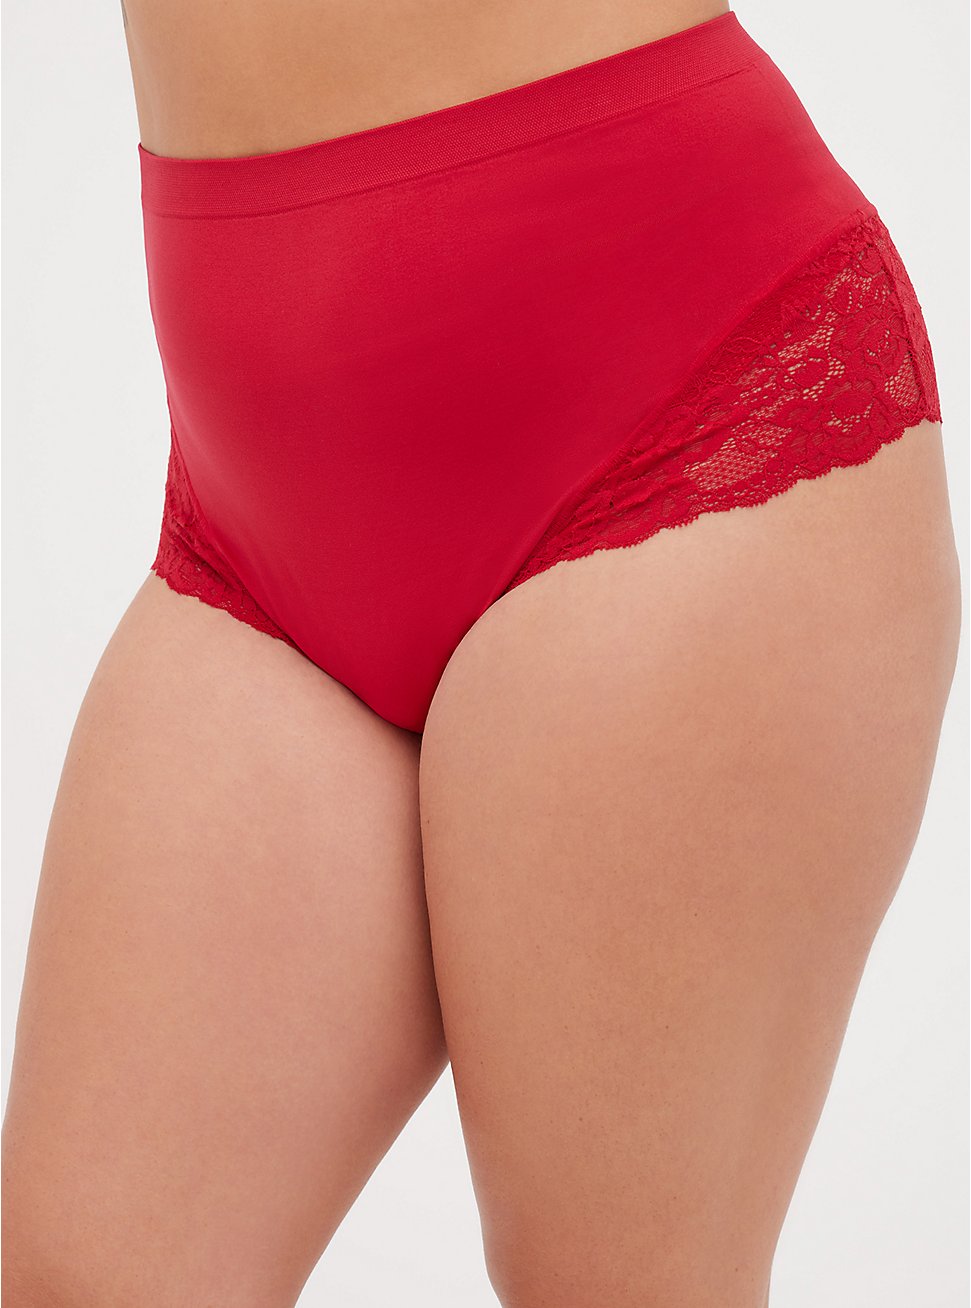 Seamless Flirt High Waist Cheeky Panty - Red, JESTER RED, hi-res